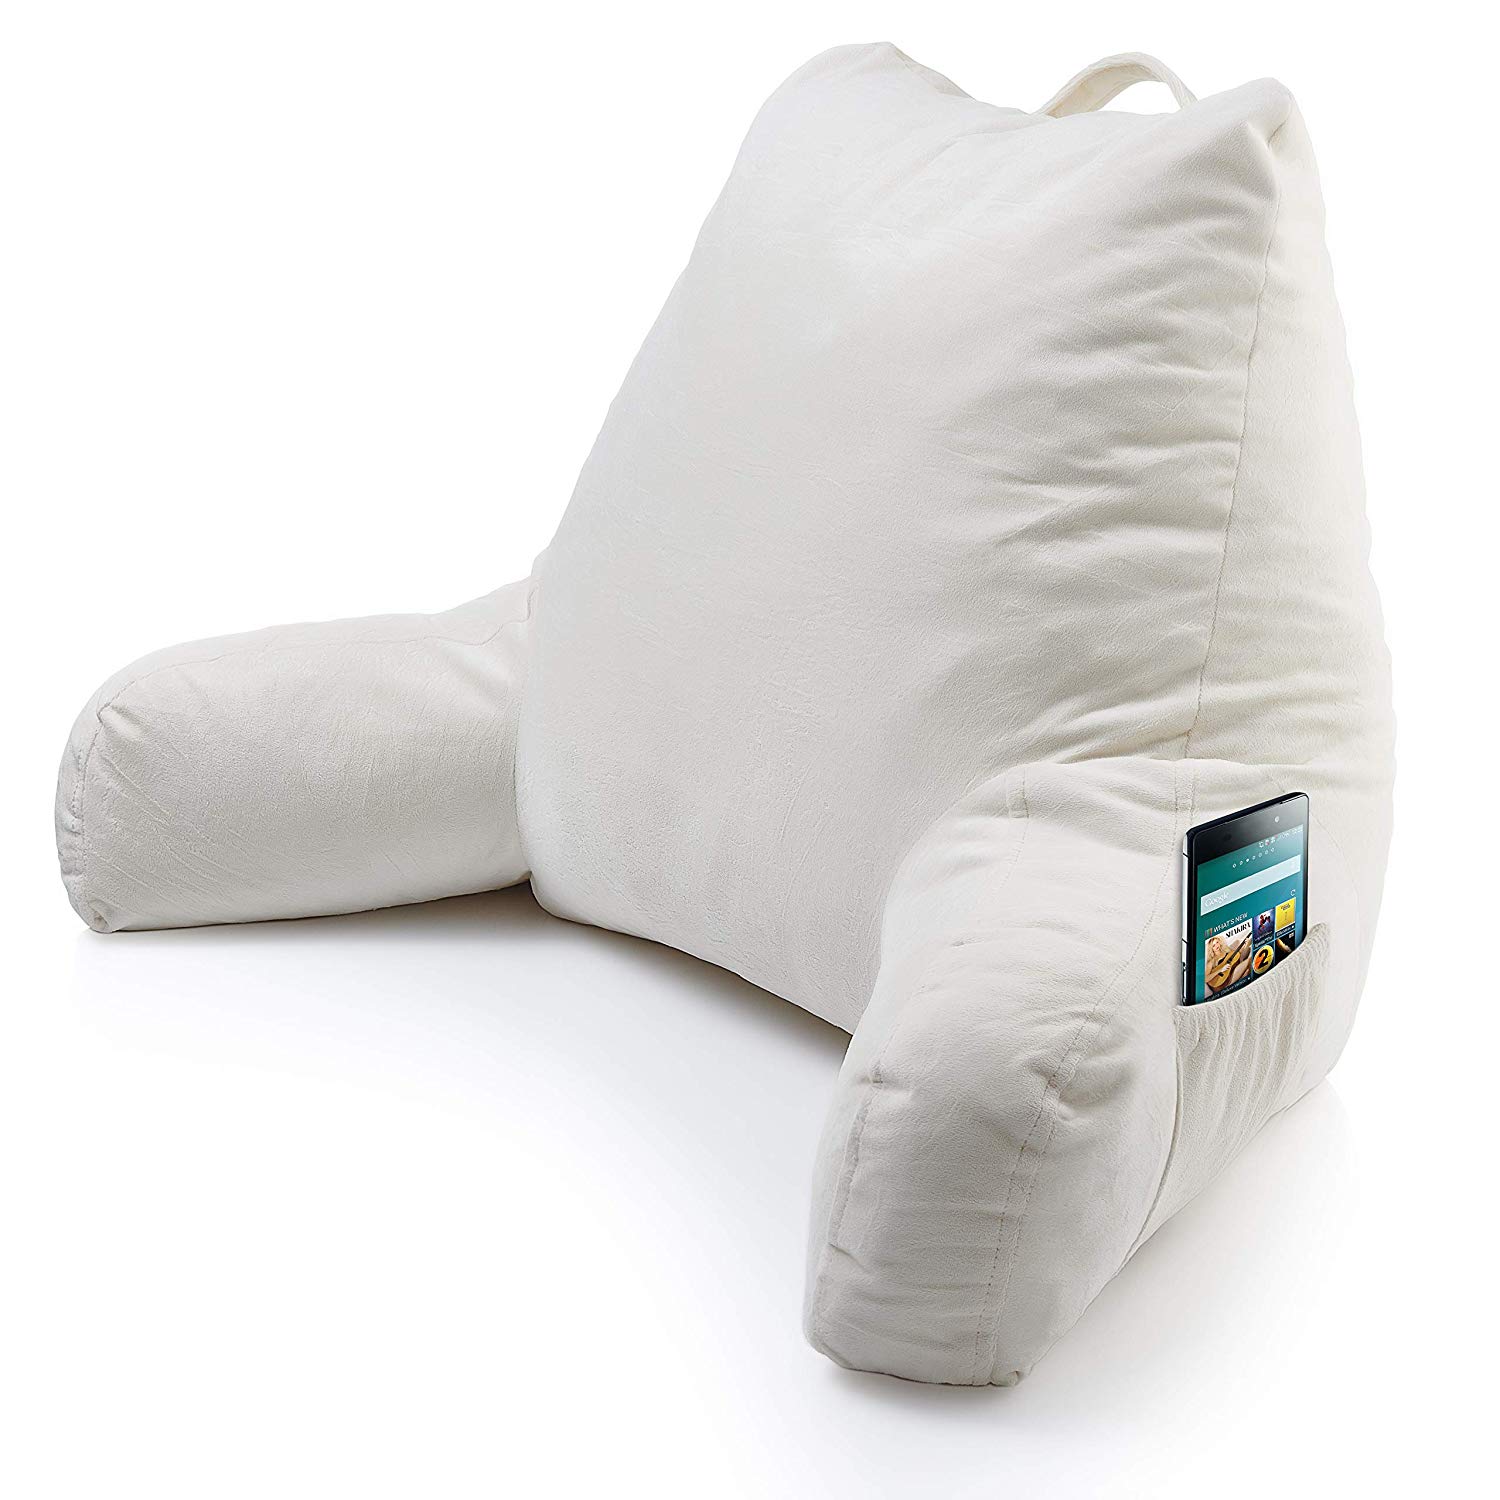 5 Best Reading Pillows on the Market — Reviews and Buyer’s Guide